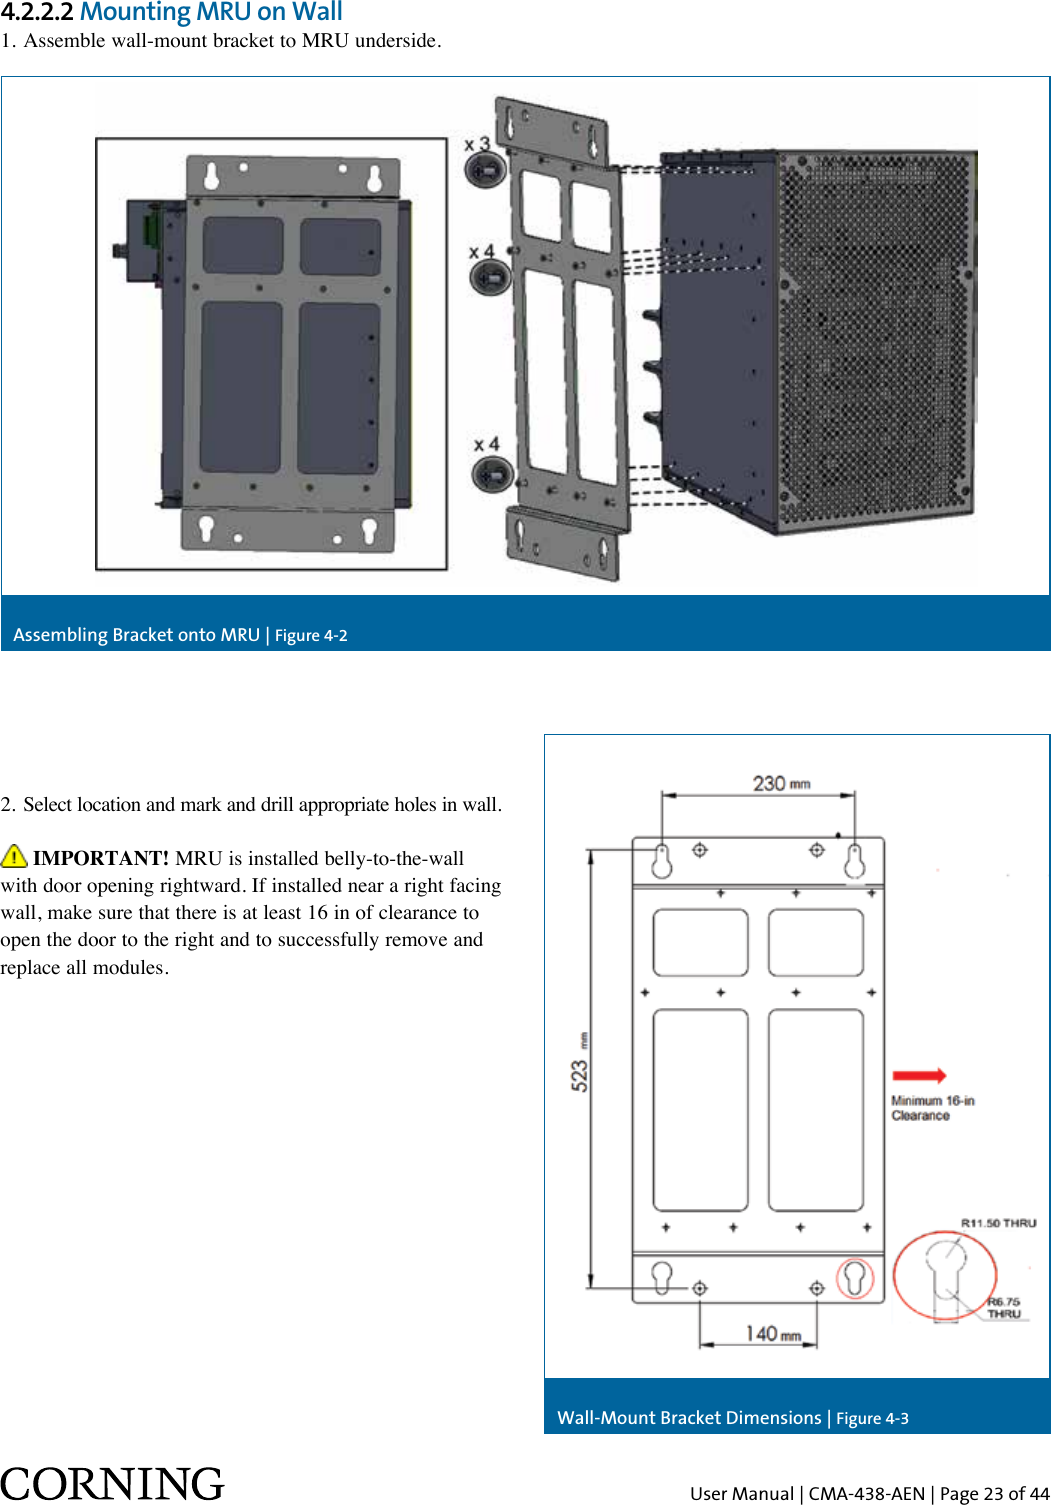 User Manual | CMA-438-AEN | Page 23 of 444.2.2.2 Mounting MRU on Wall1. Assemble wall-mount bracket to MRU underside.2.  Select location and mark and drill appropriate holes in wall. IMPORTANT! MRU is installed belly-to-the-wall with door opening rightward. If installed near a right facing wall, make sure that there is at least 16 in of clearance to open the door to the right and to successfully remove and replace all modules.Assembling Bracket onto MRU | Figure 4-2Wall-Mount Bracket Dimensions | Figure 4-3